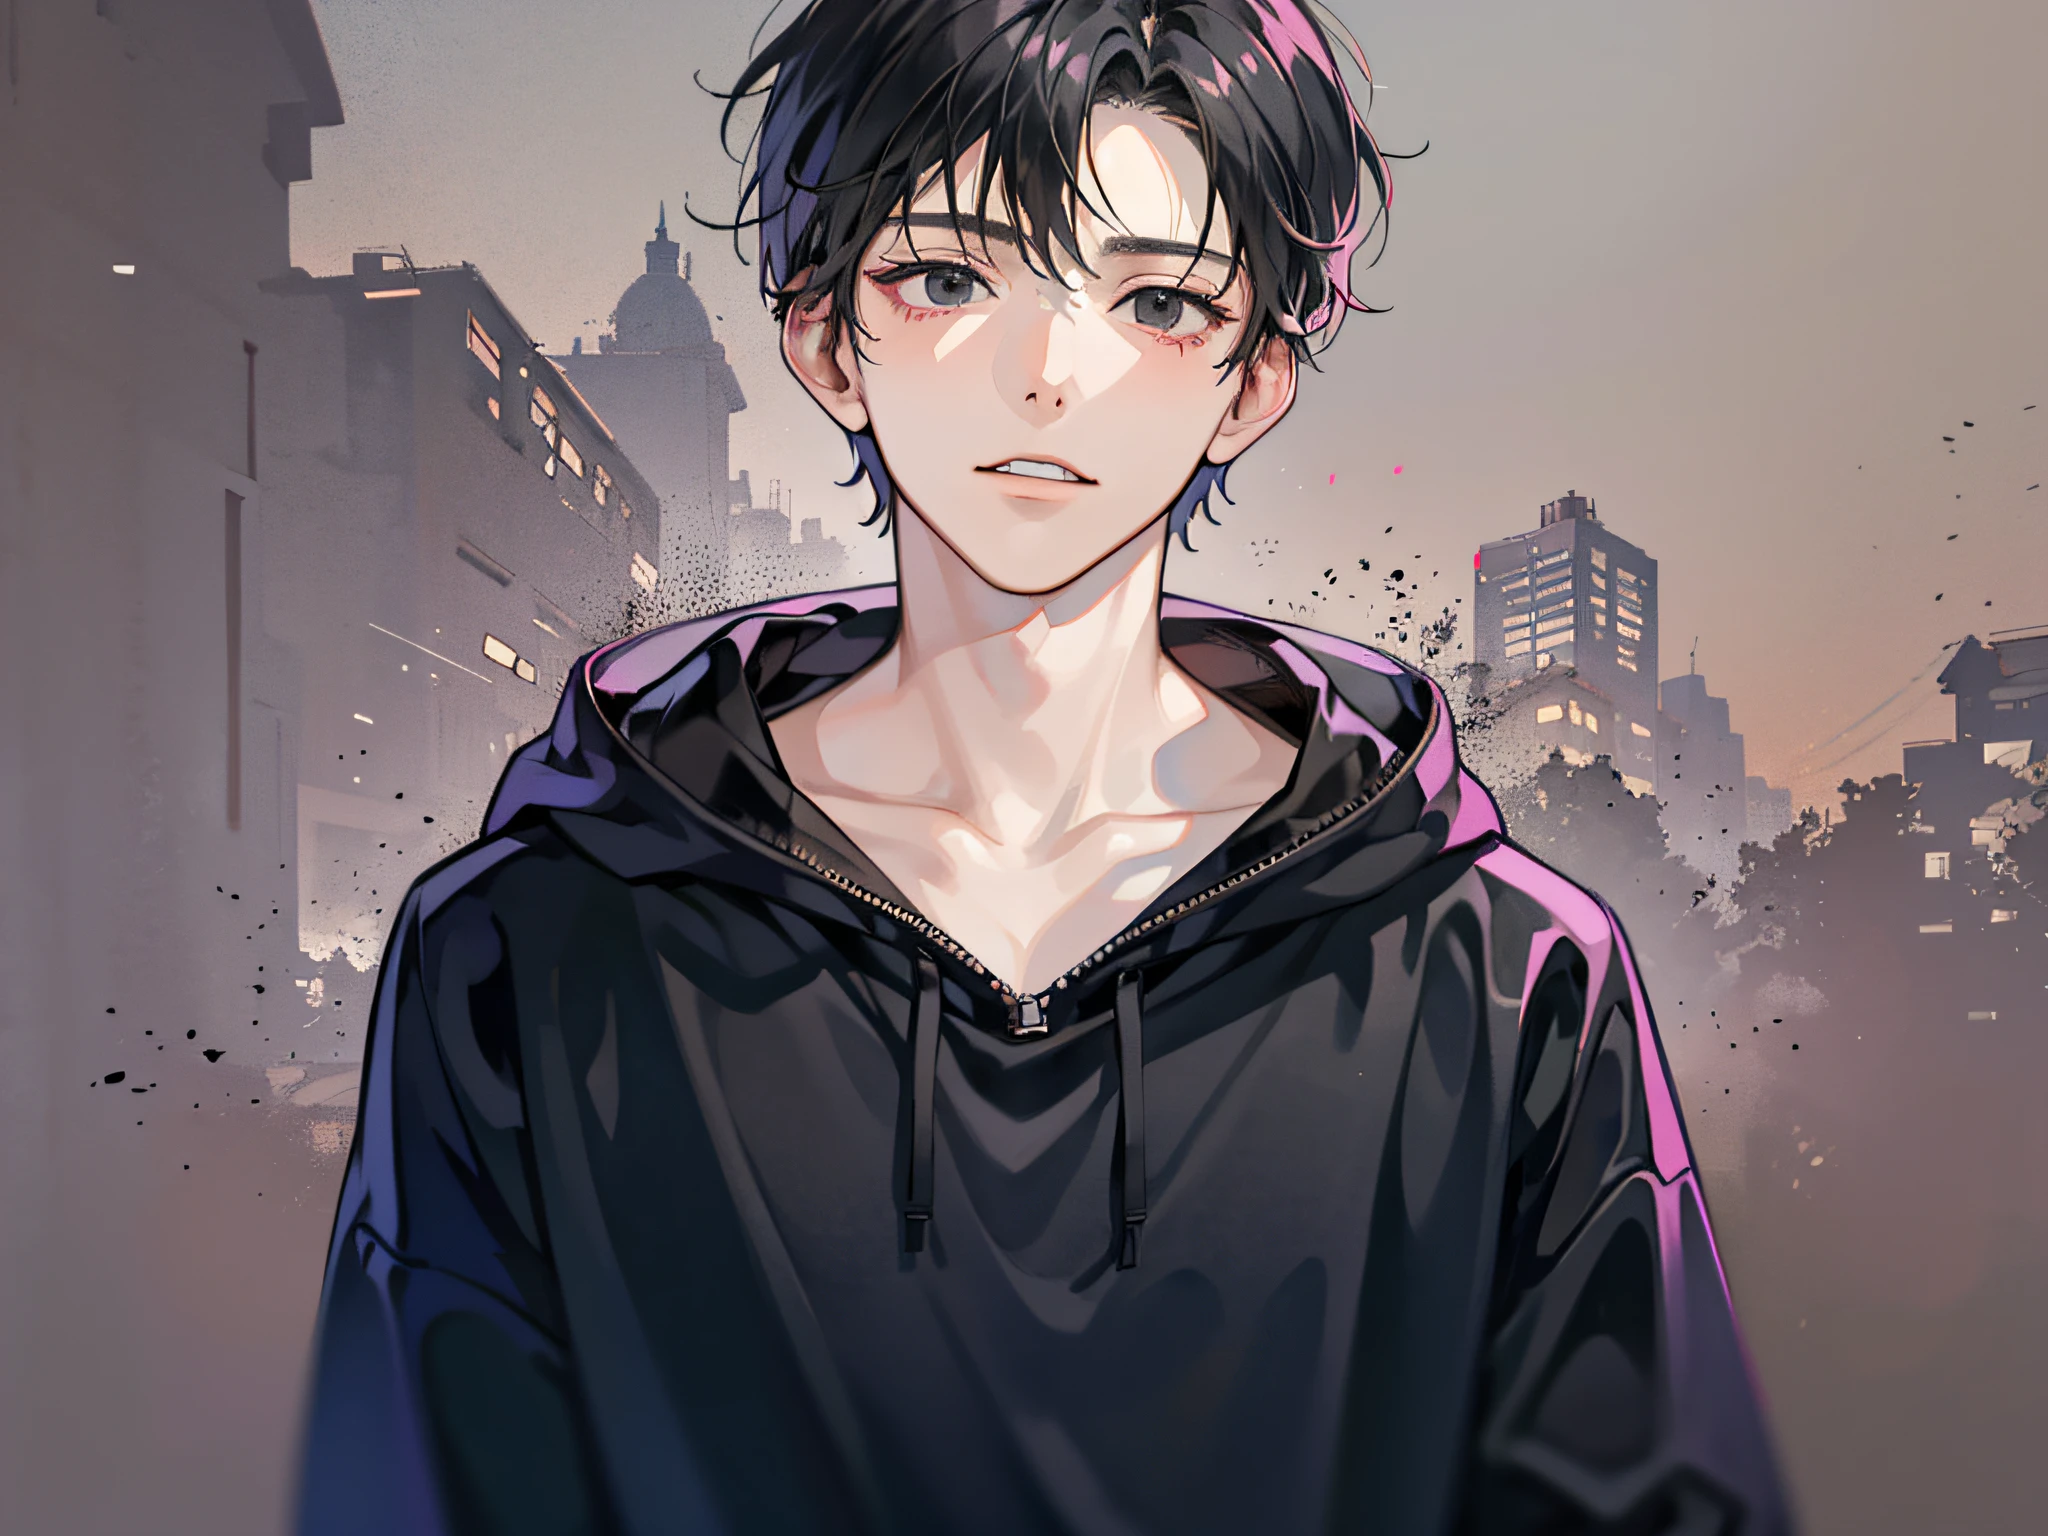 masutepiece, Detailed picture, 20-year-old man, The upper part of the body, A dark-haired, Black eyes, gloom, Wearing a sweatshirt, The background is a town